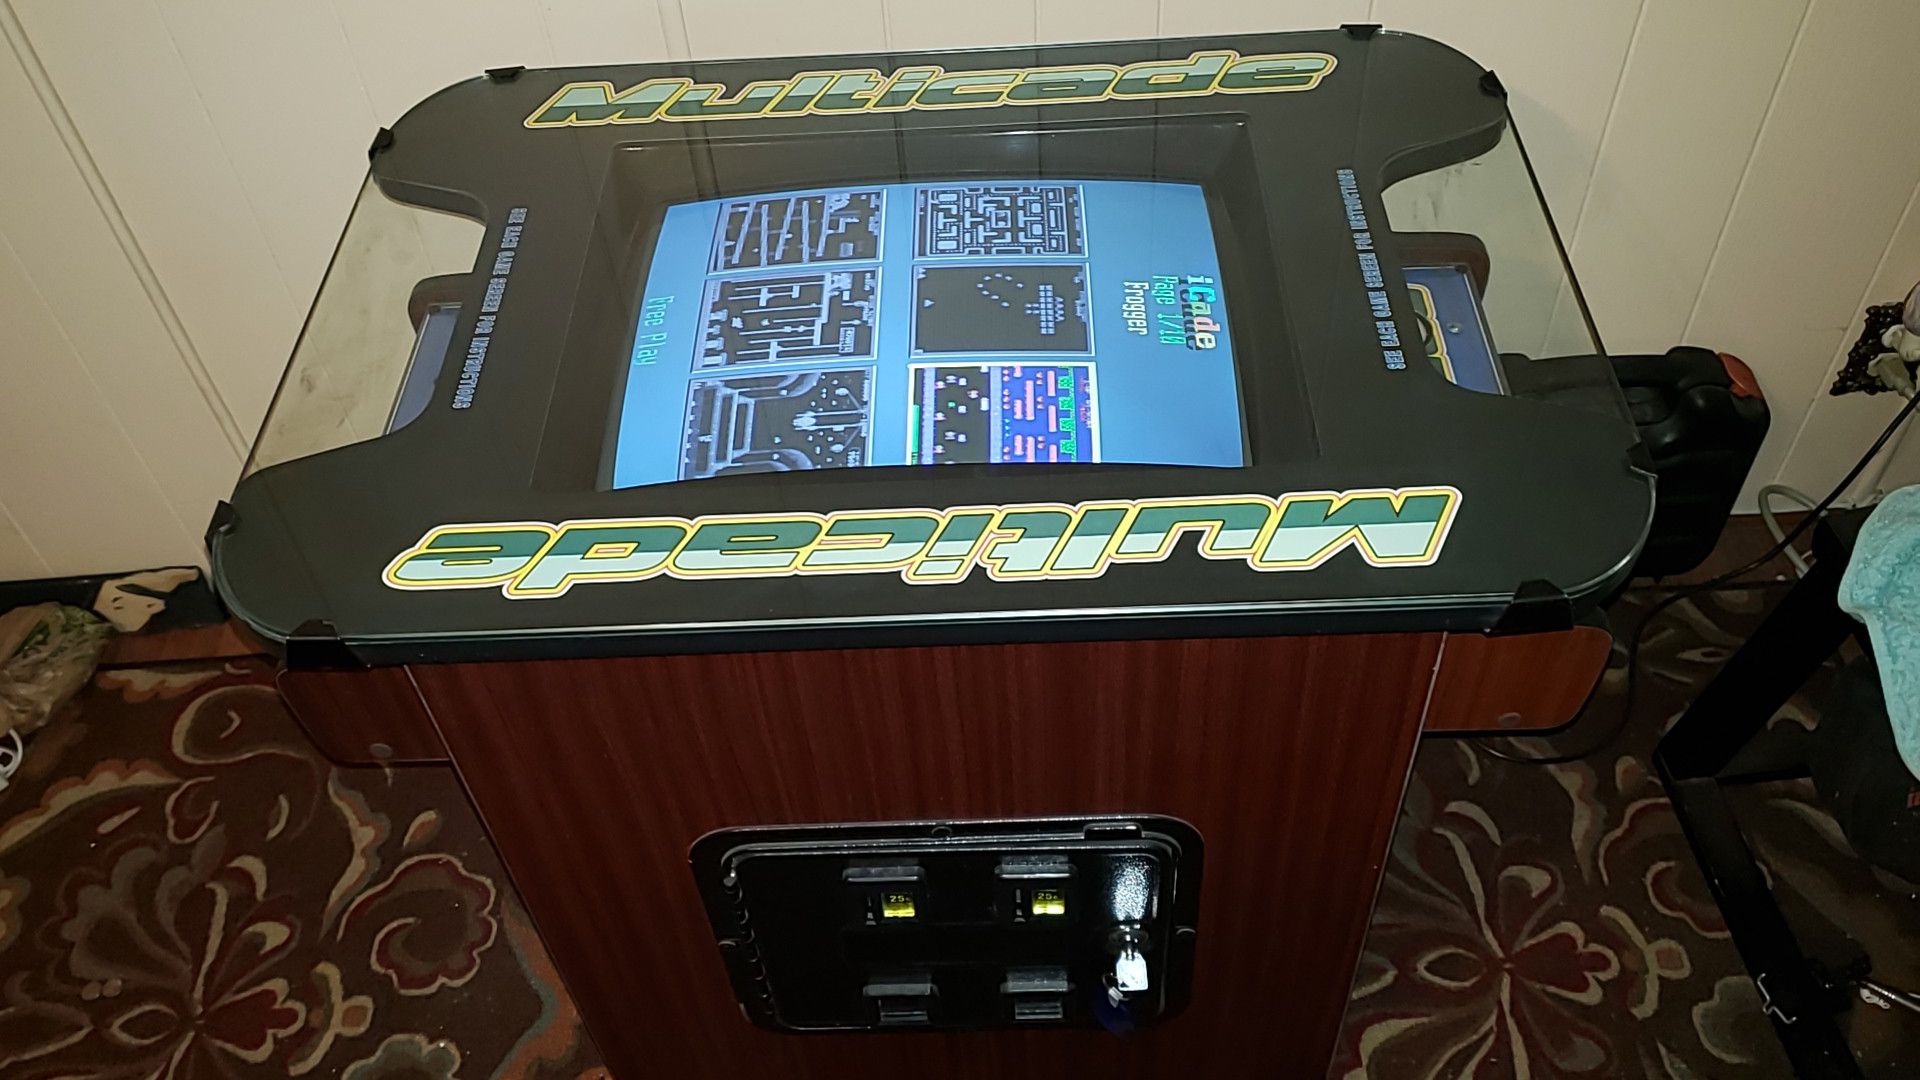 MULTICADE TABLE VIDEO GAME